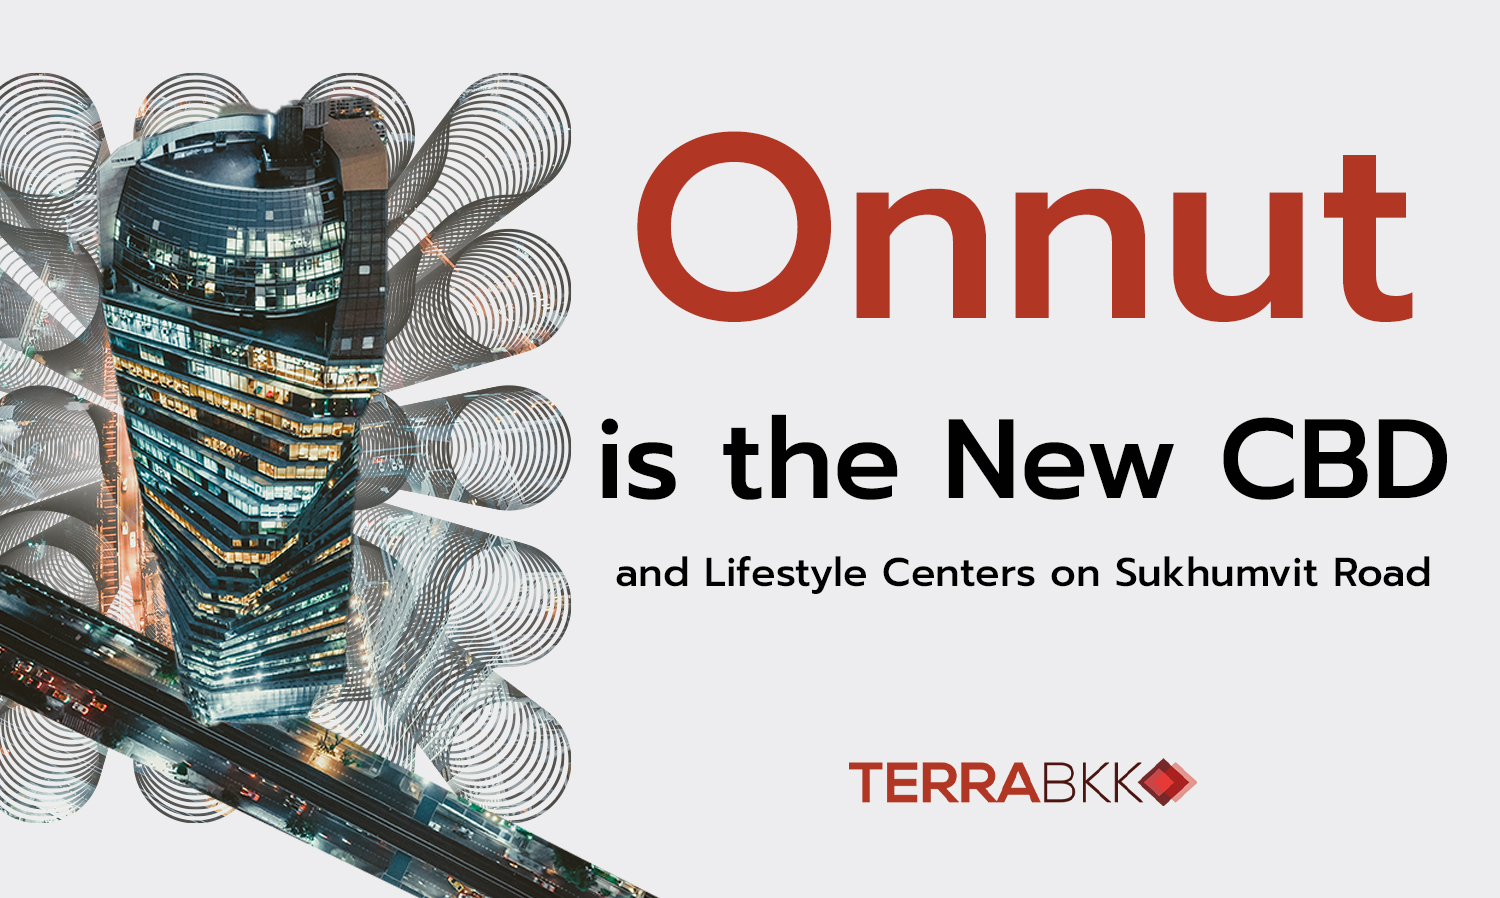 Onnut is the New CBD and Lifestyle Centers on Sukhumvit Road